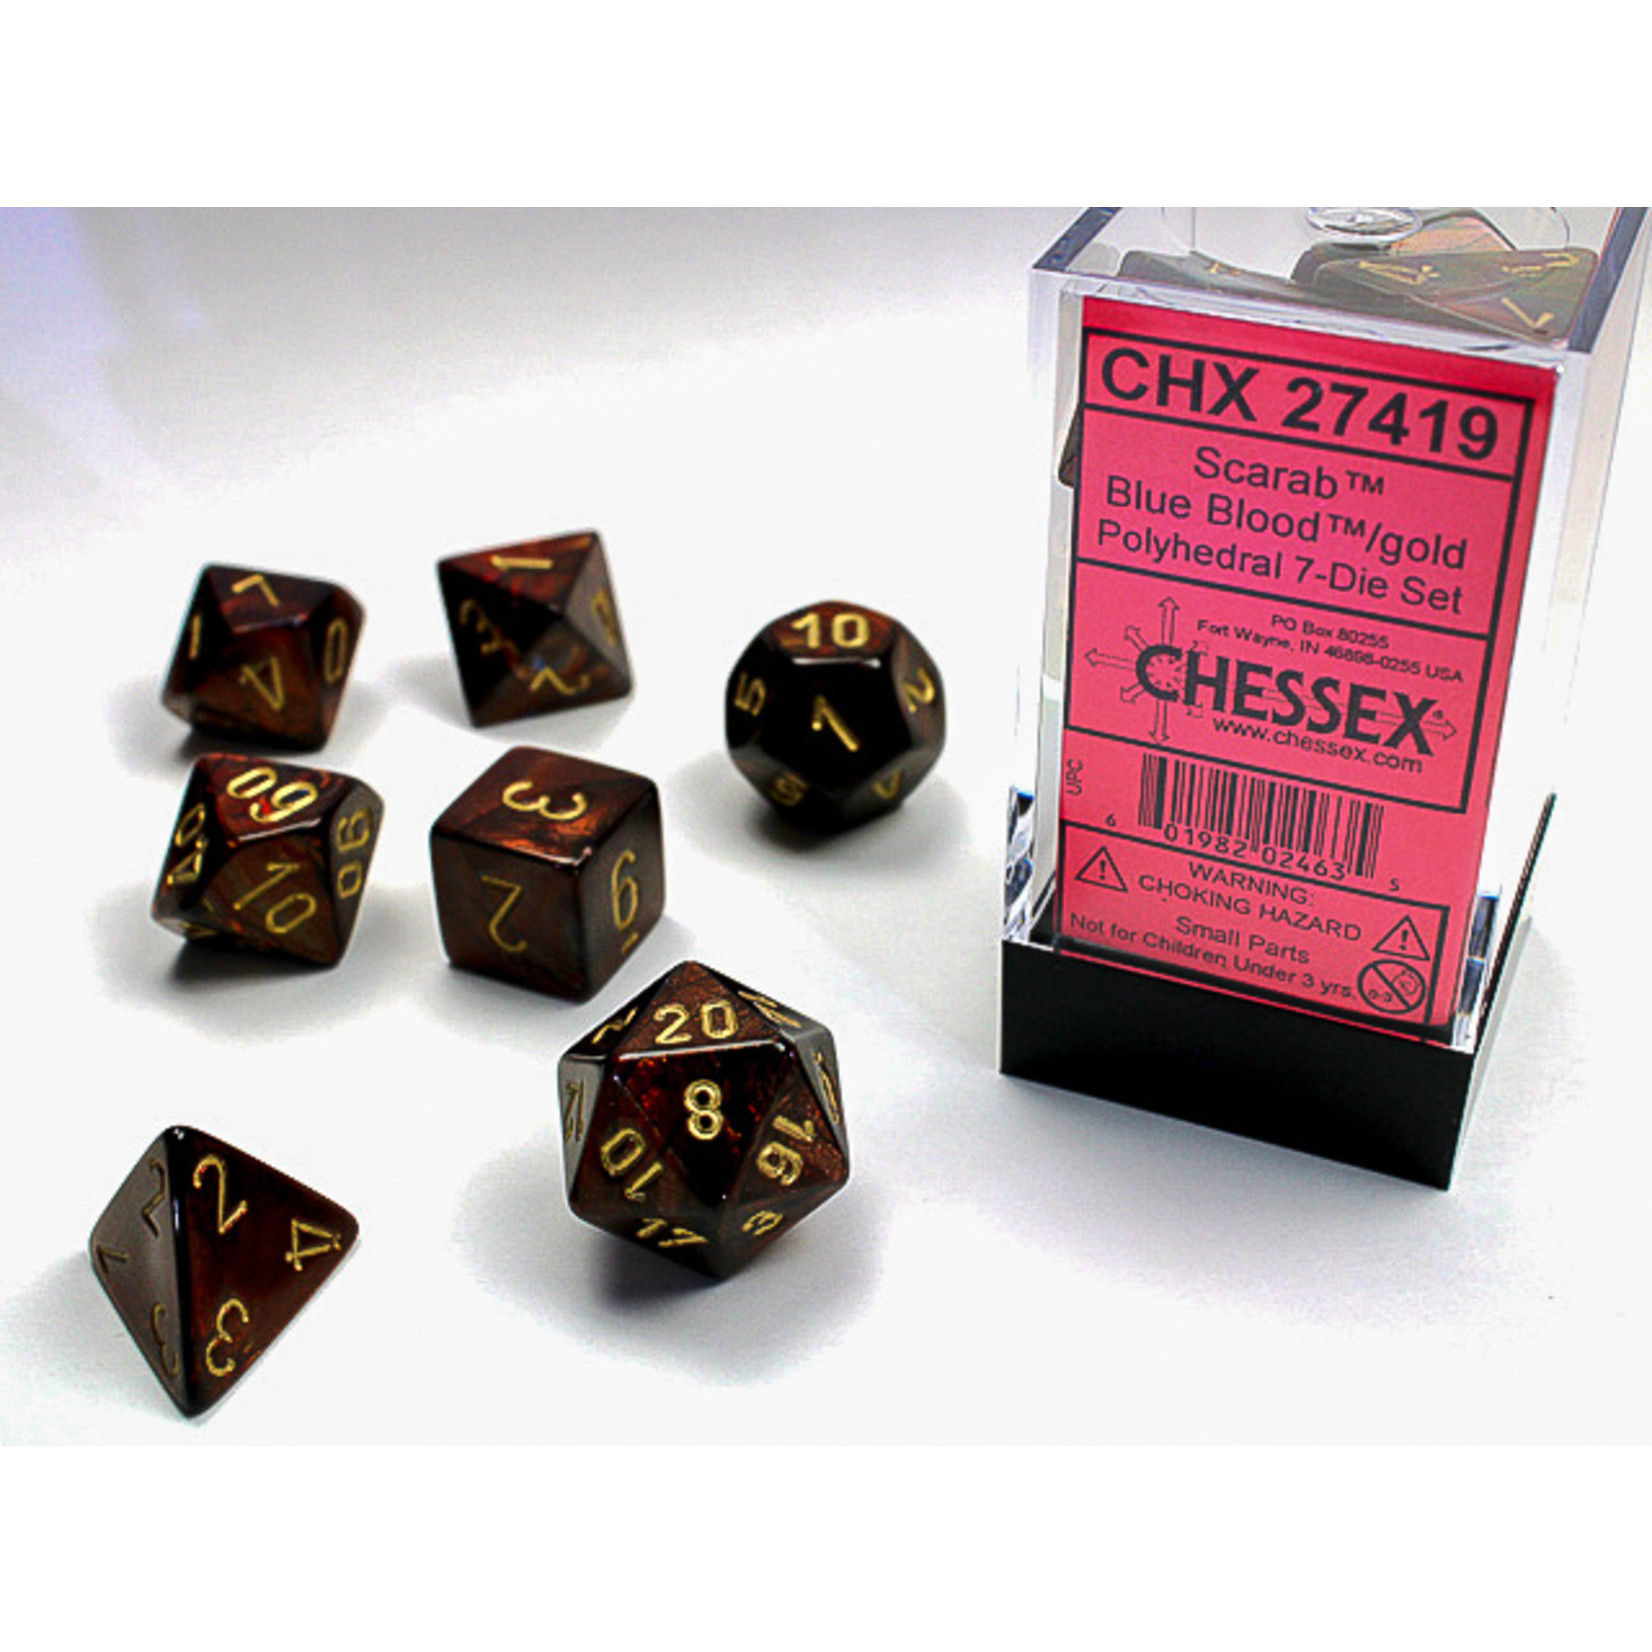 Chessex 27419 Scarab Poly Blue Blood/Gold